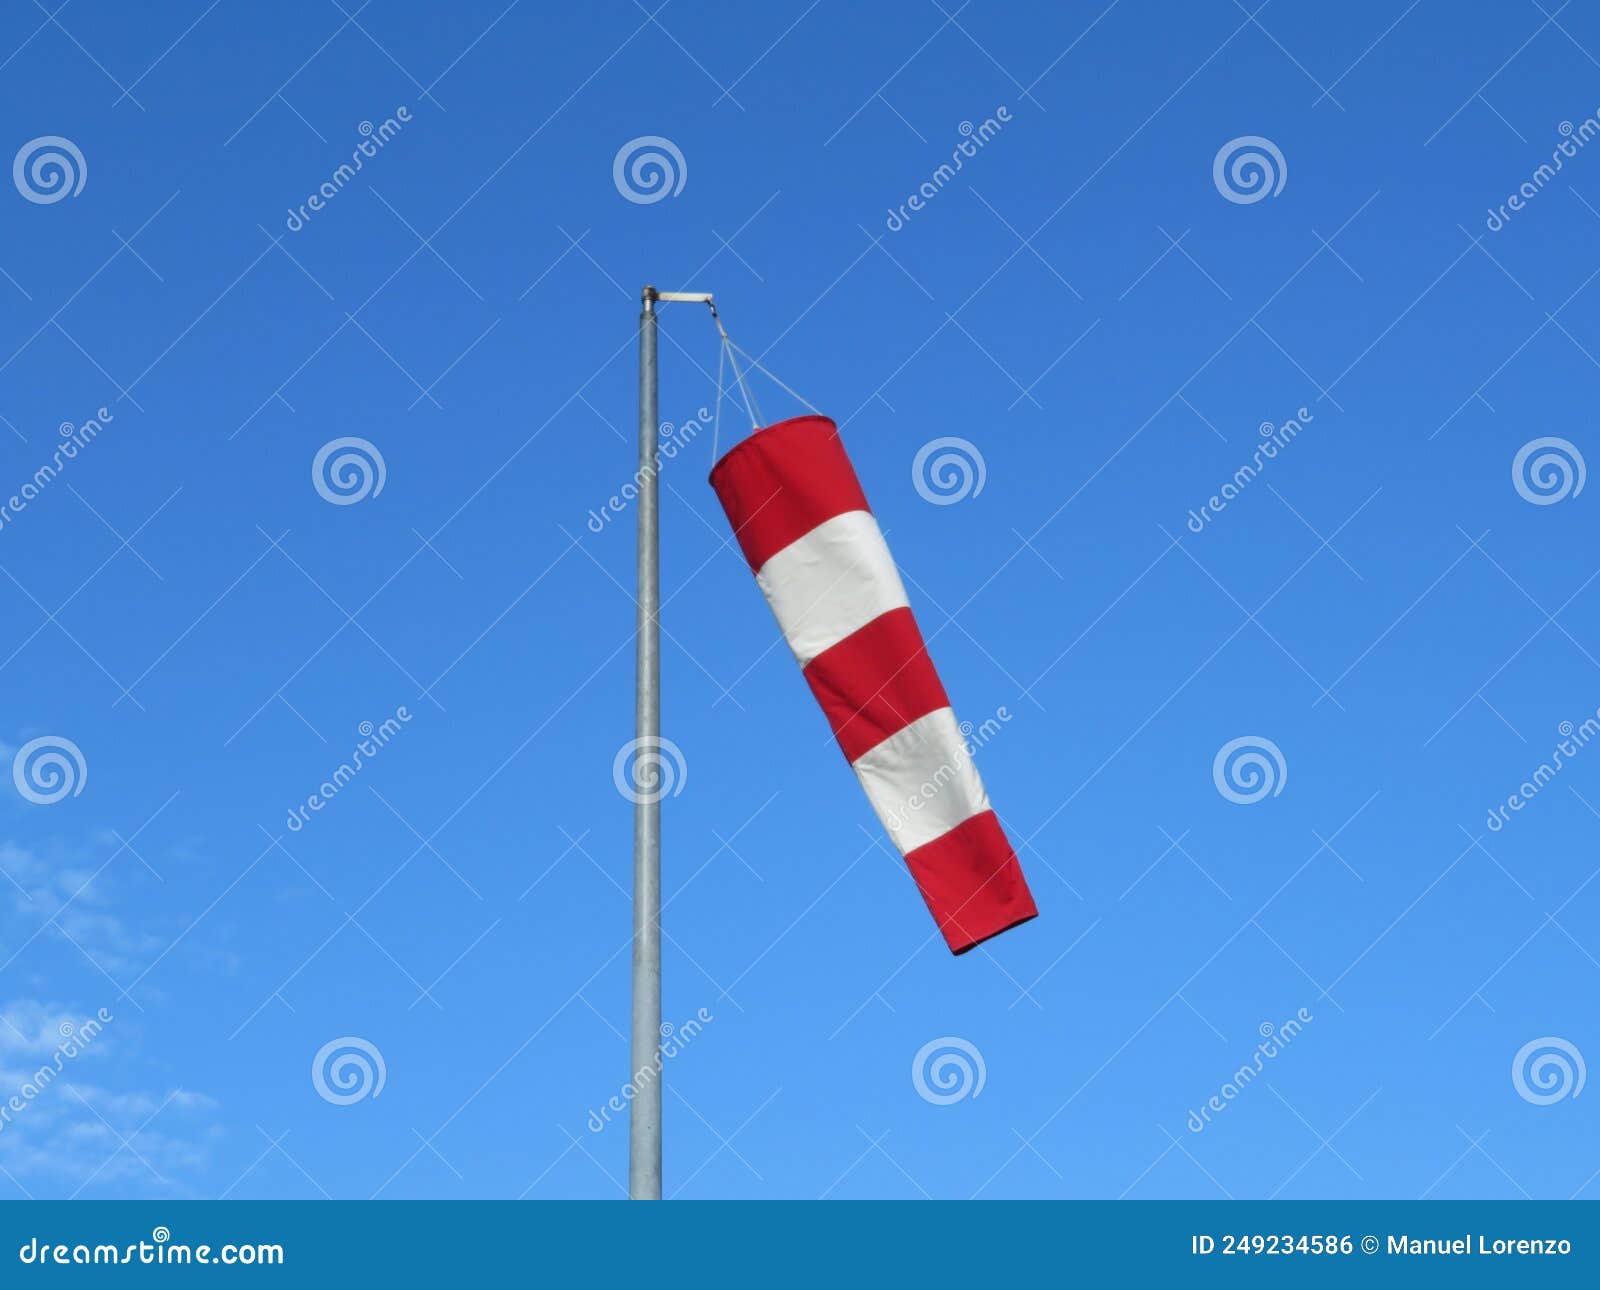 red and white wind indicator safety signal warning